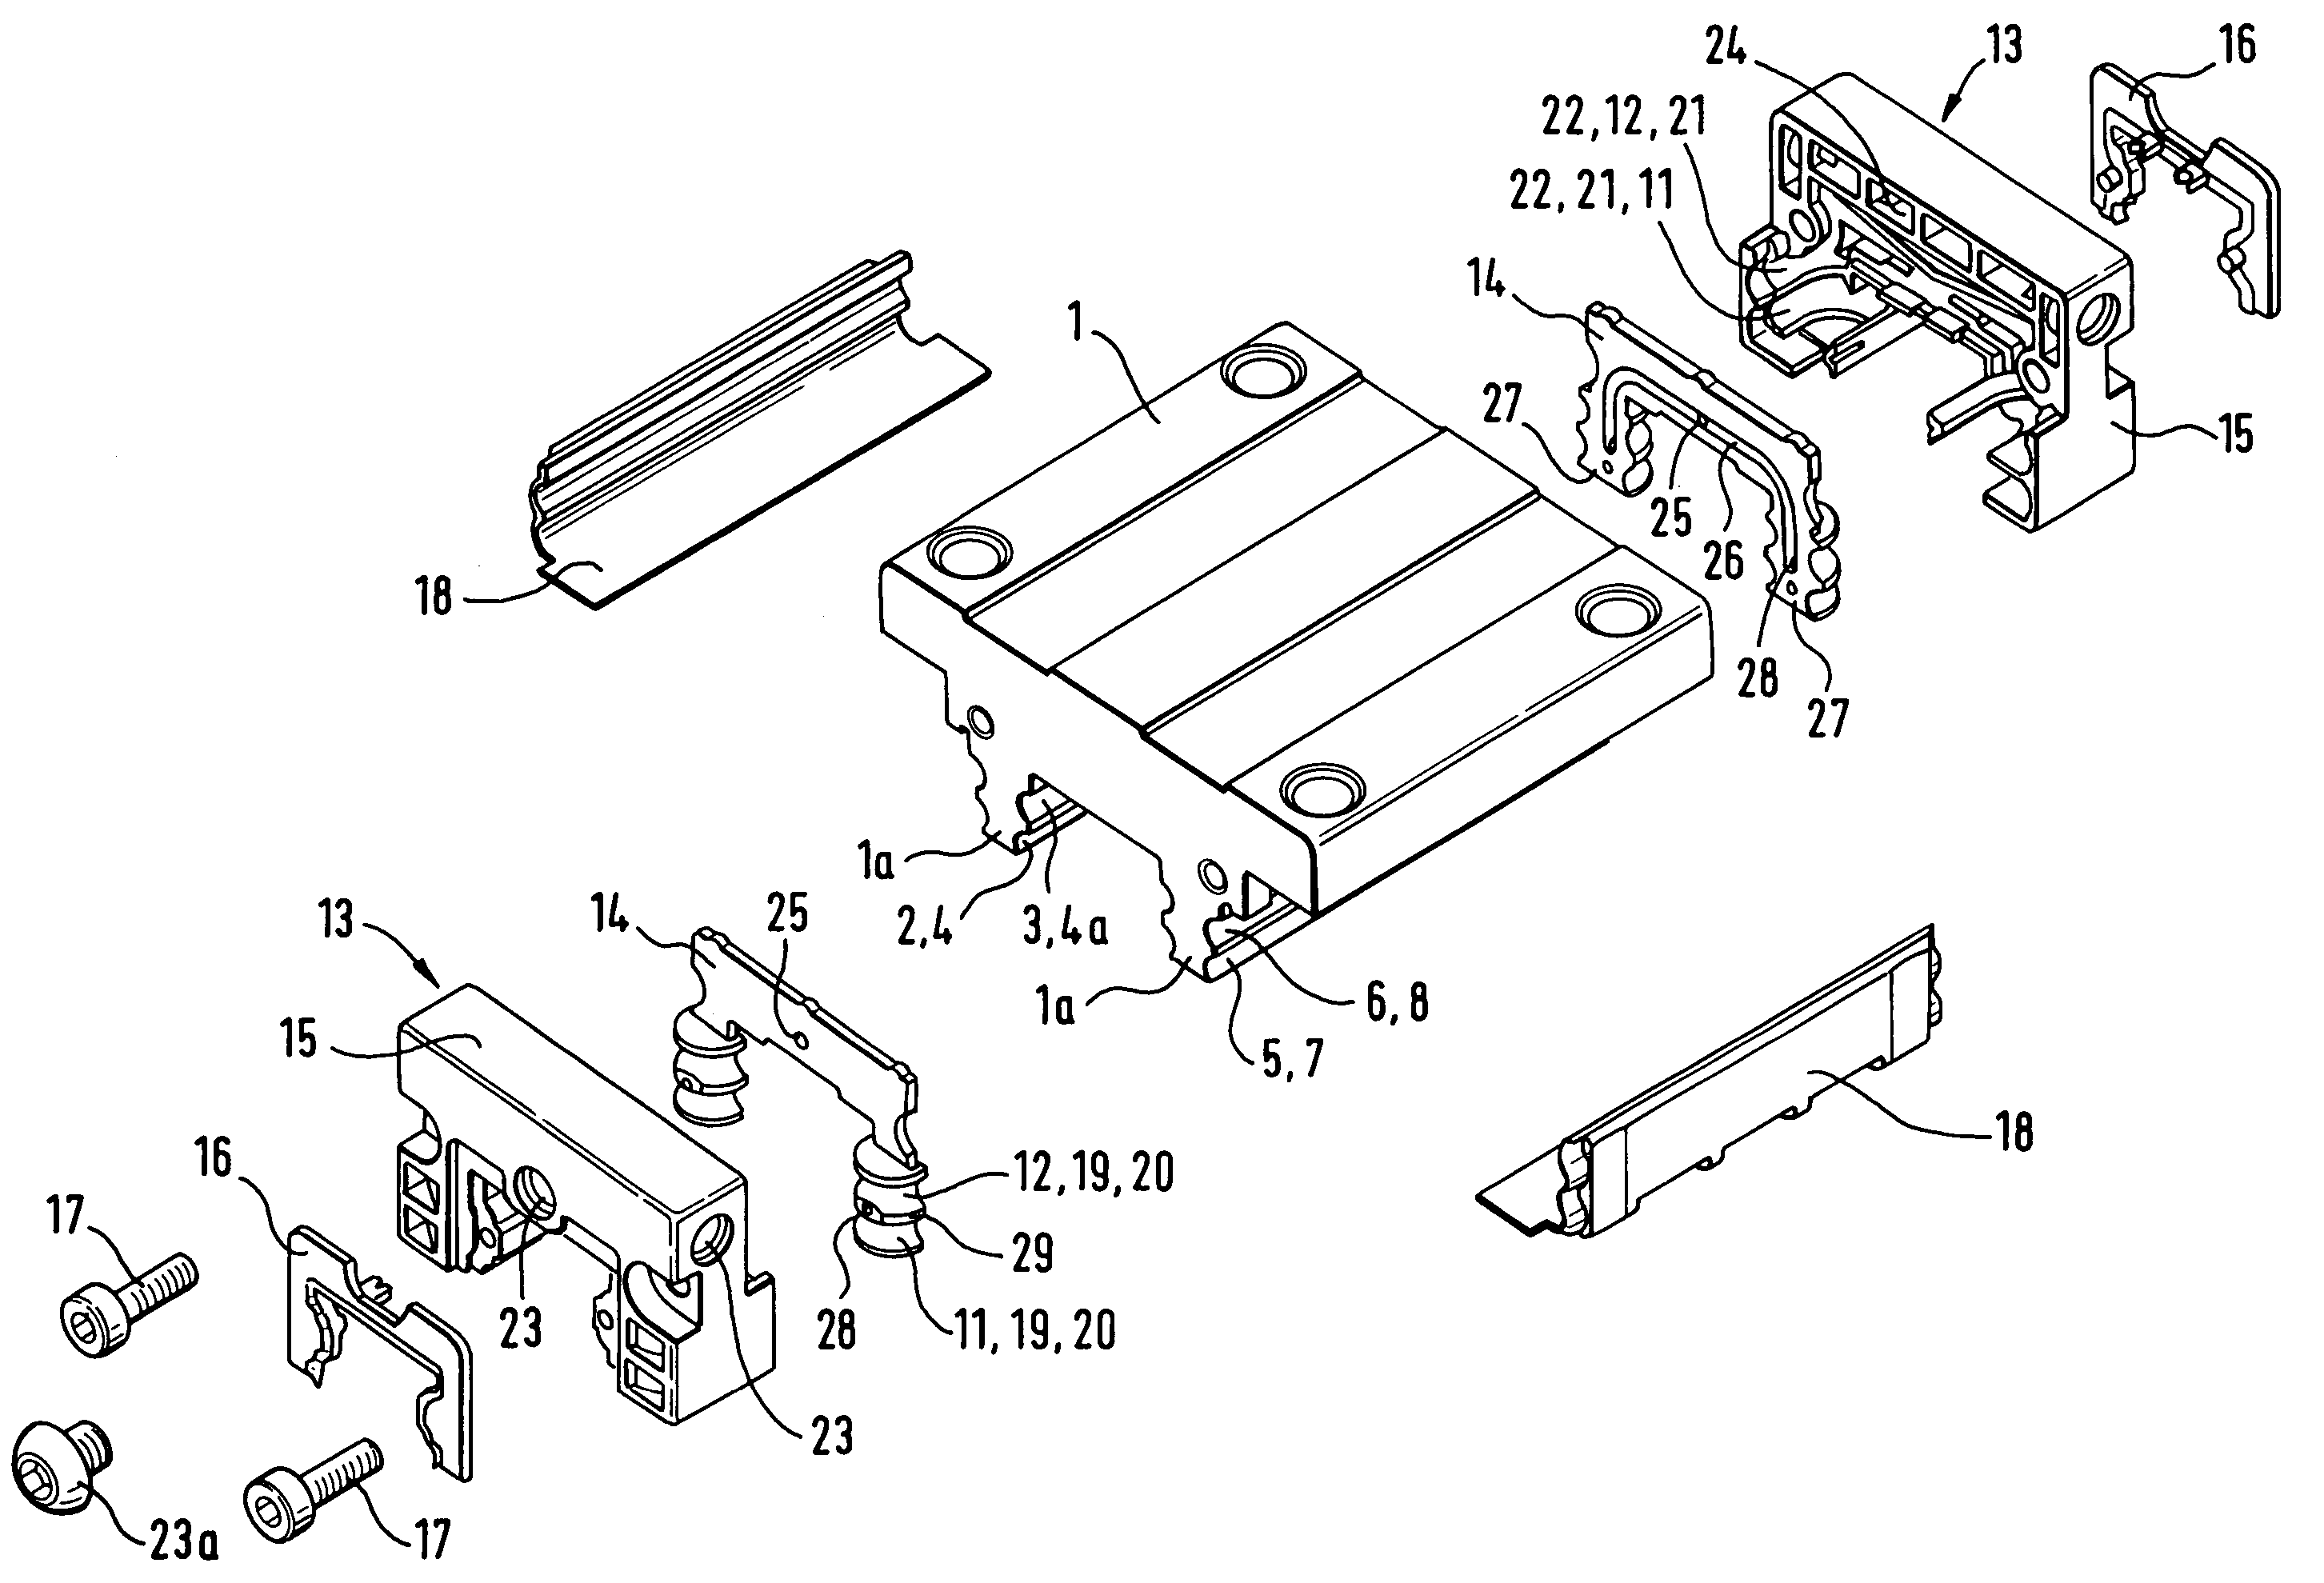 Guide carriage of a linear rolling bearing